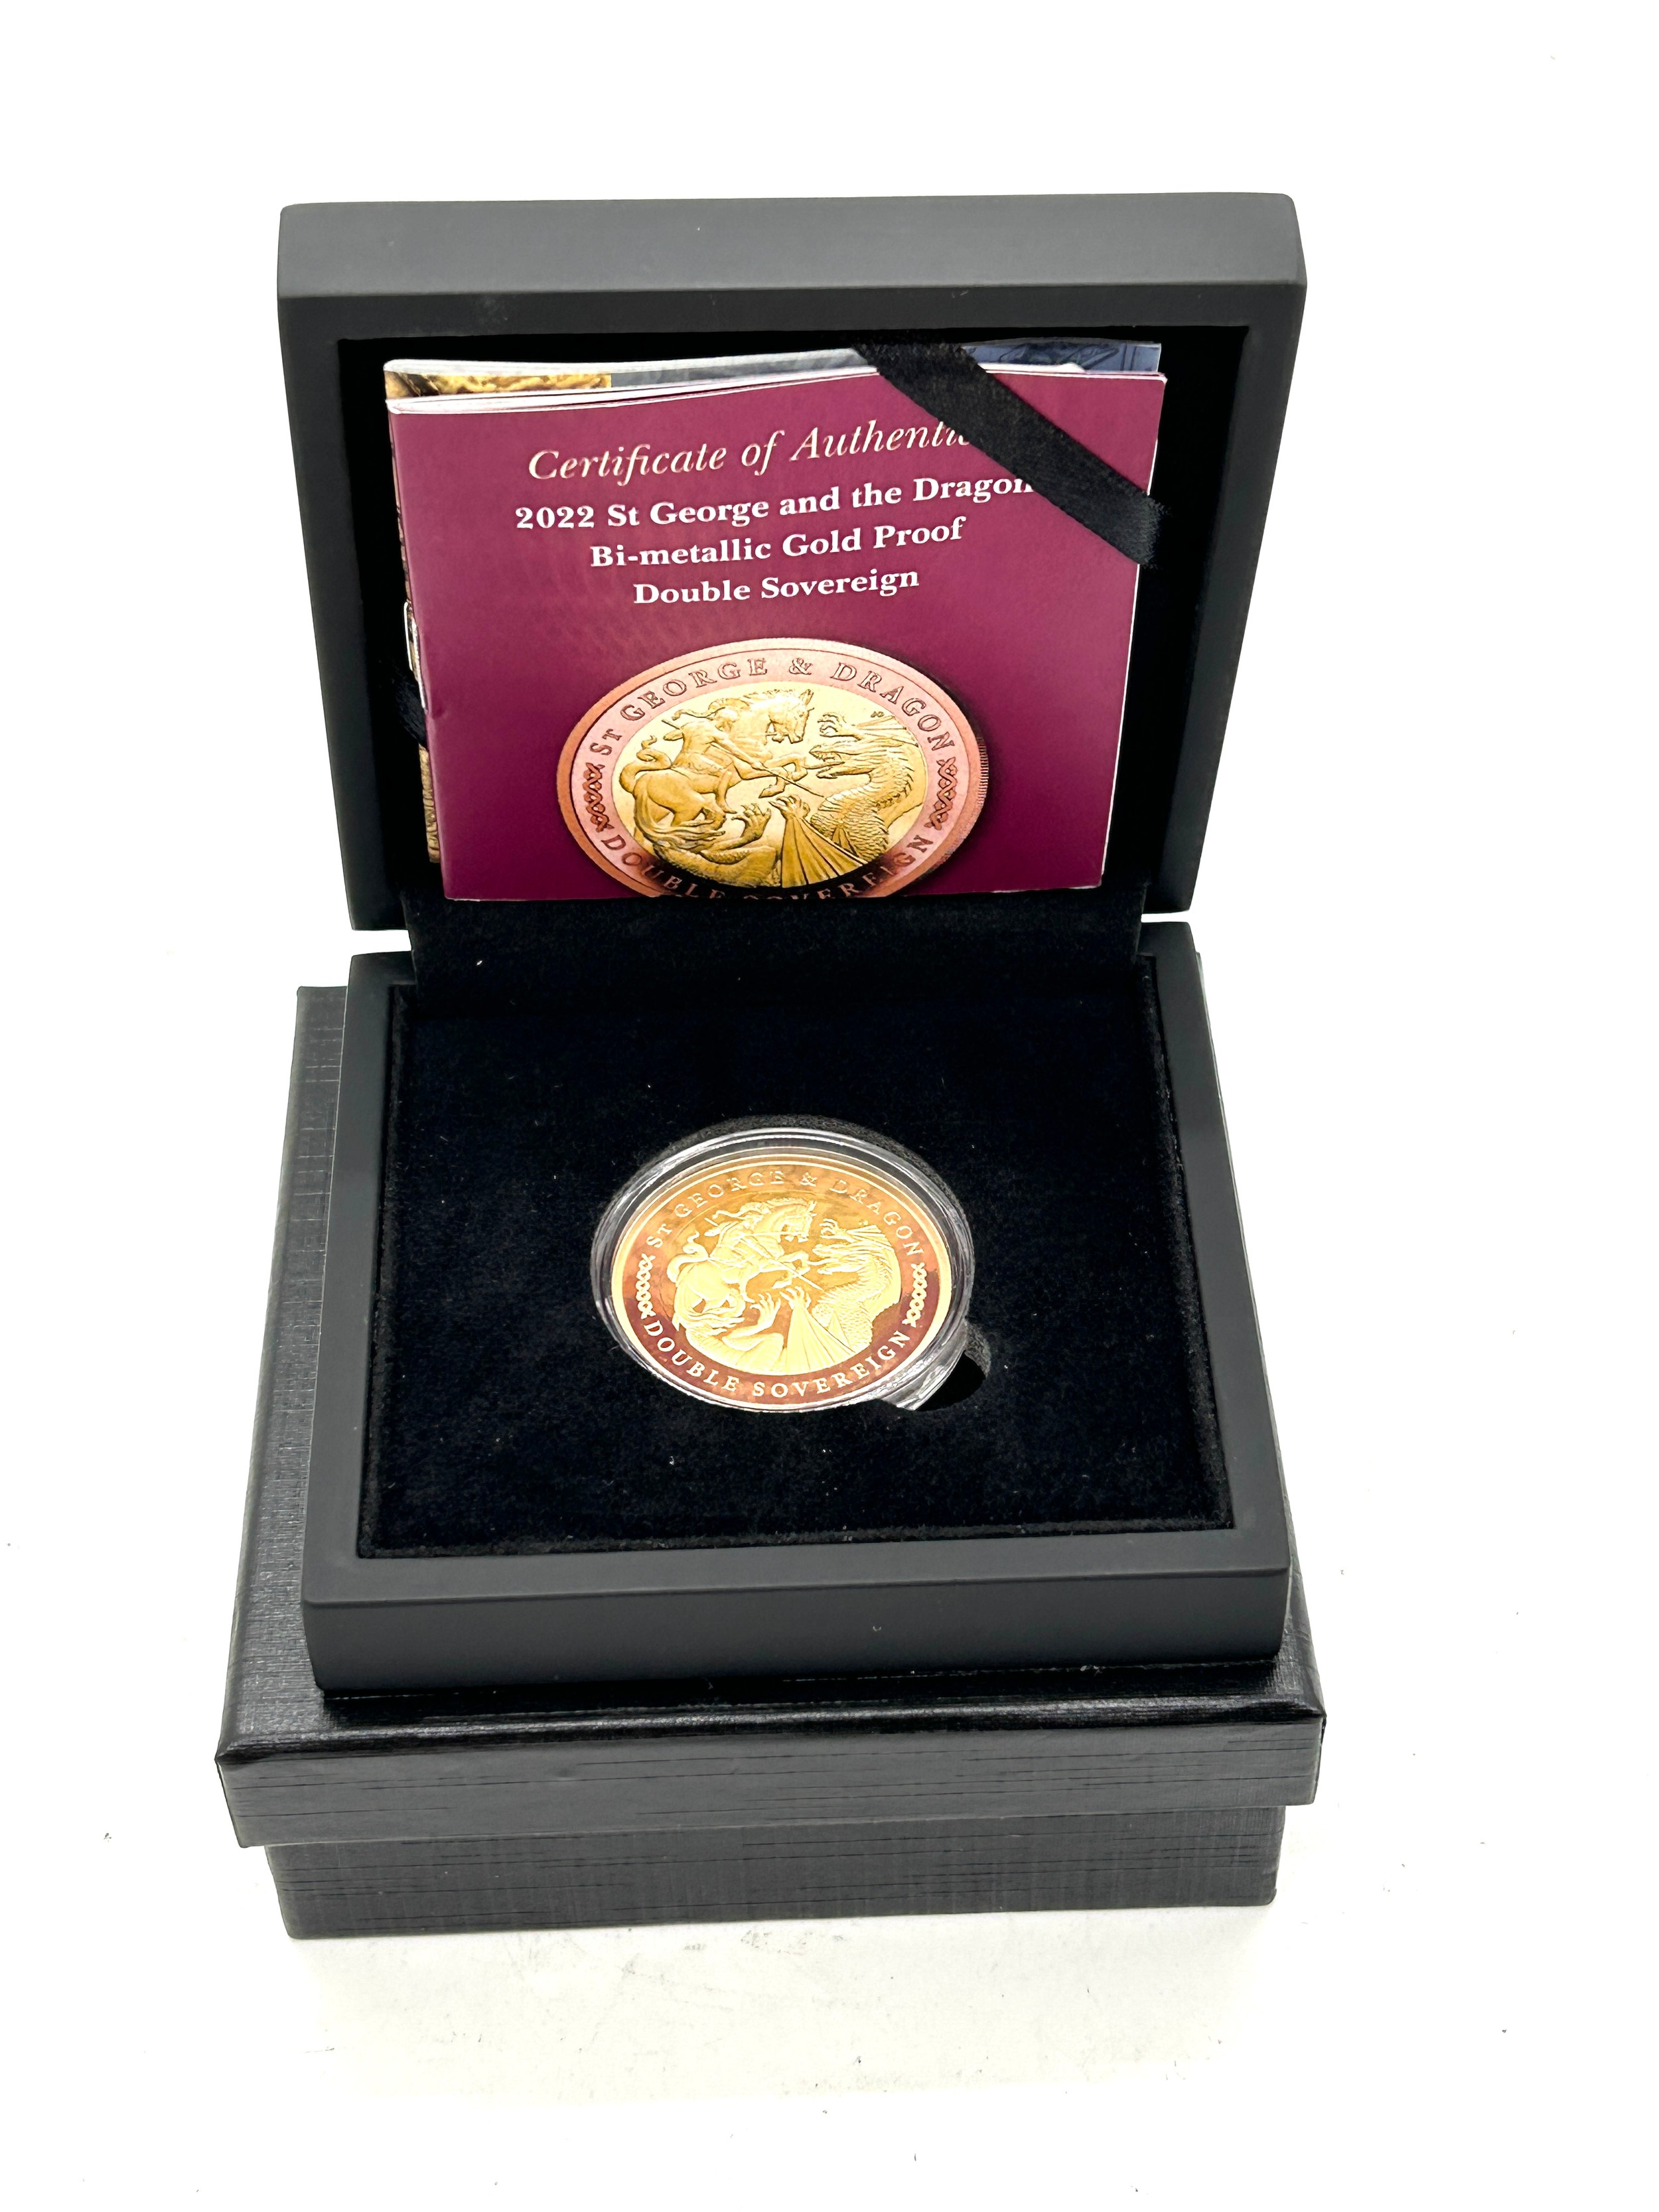 Cased Hatton 22ct 2022 St George and the Dragon Bi-metallic gold double sovereign - Image 2 of 4